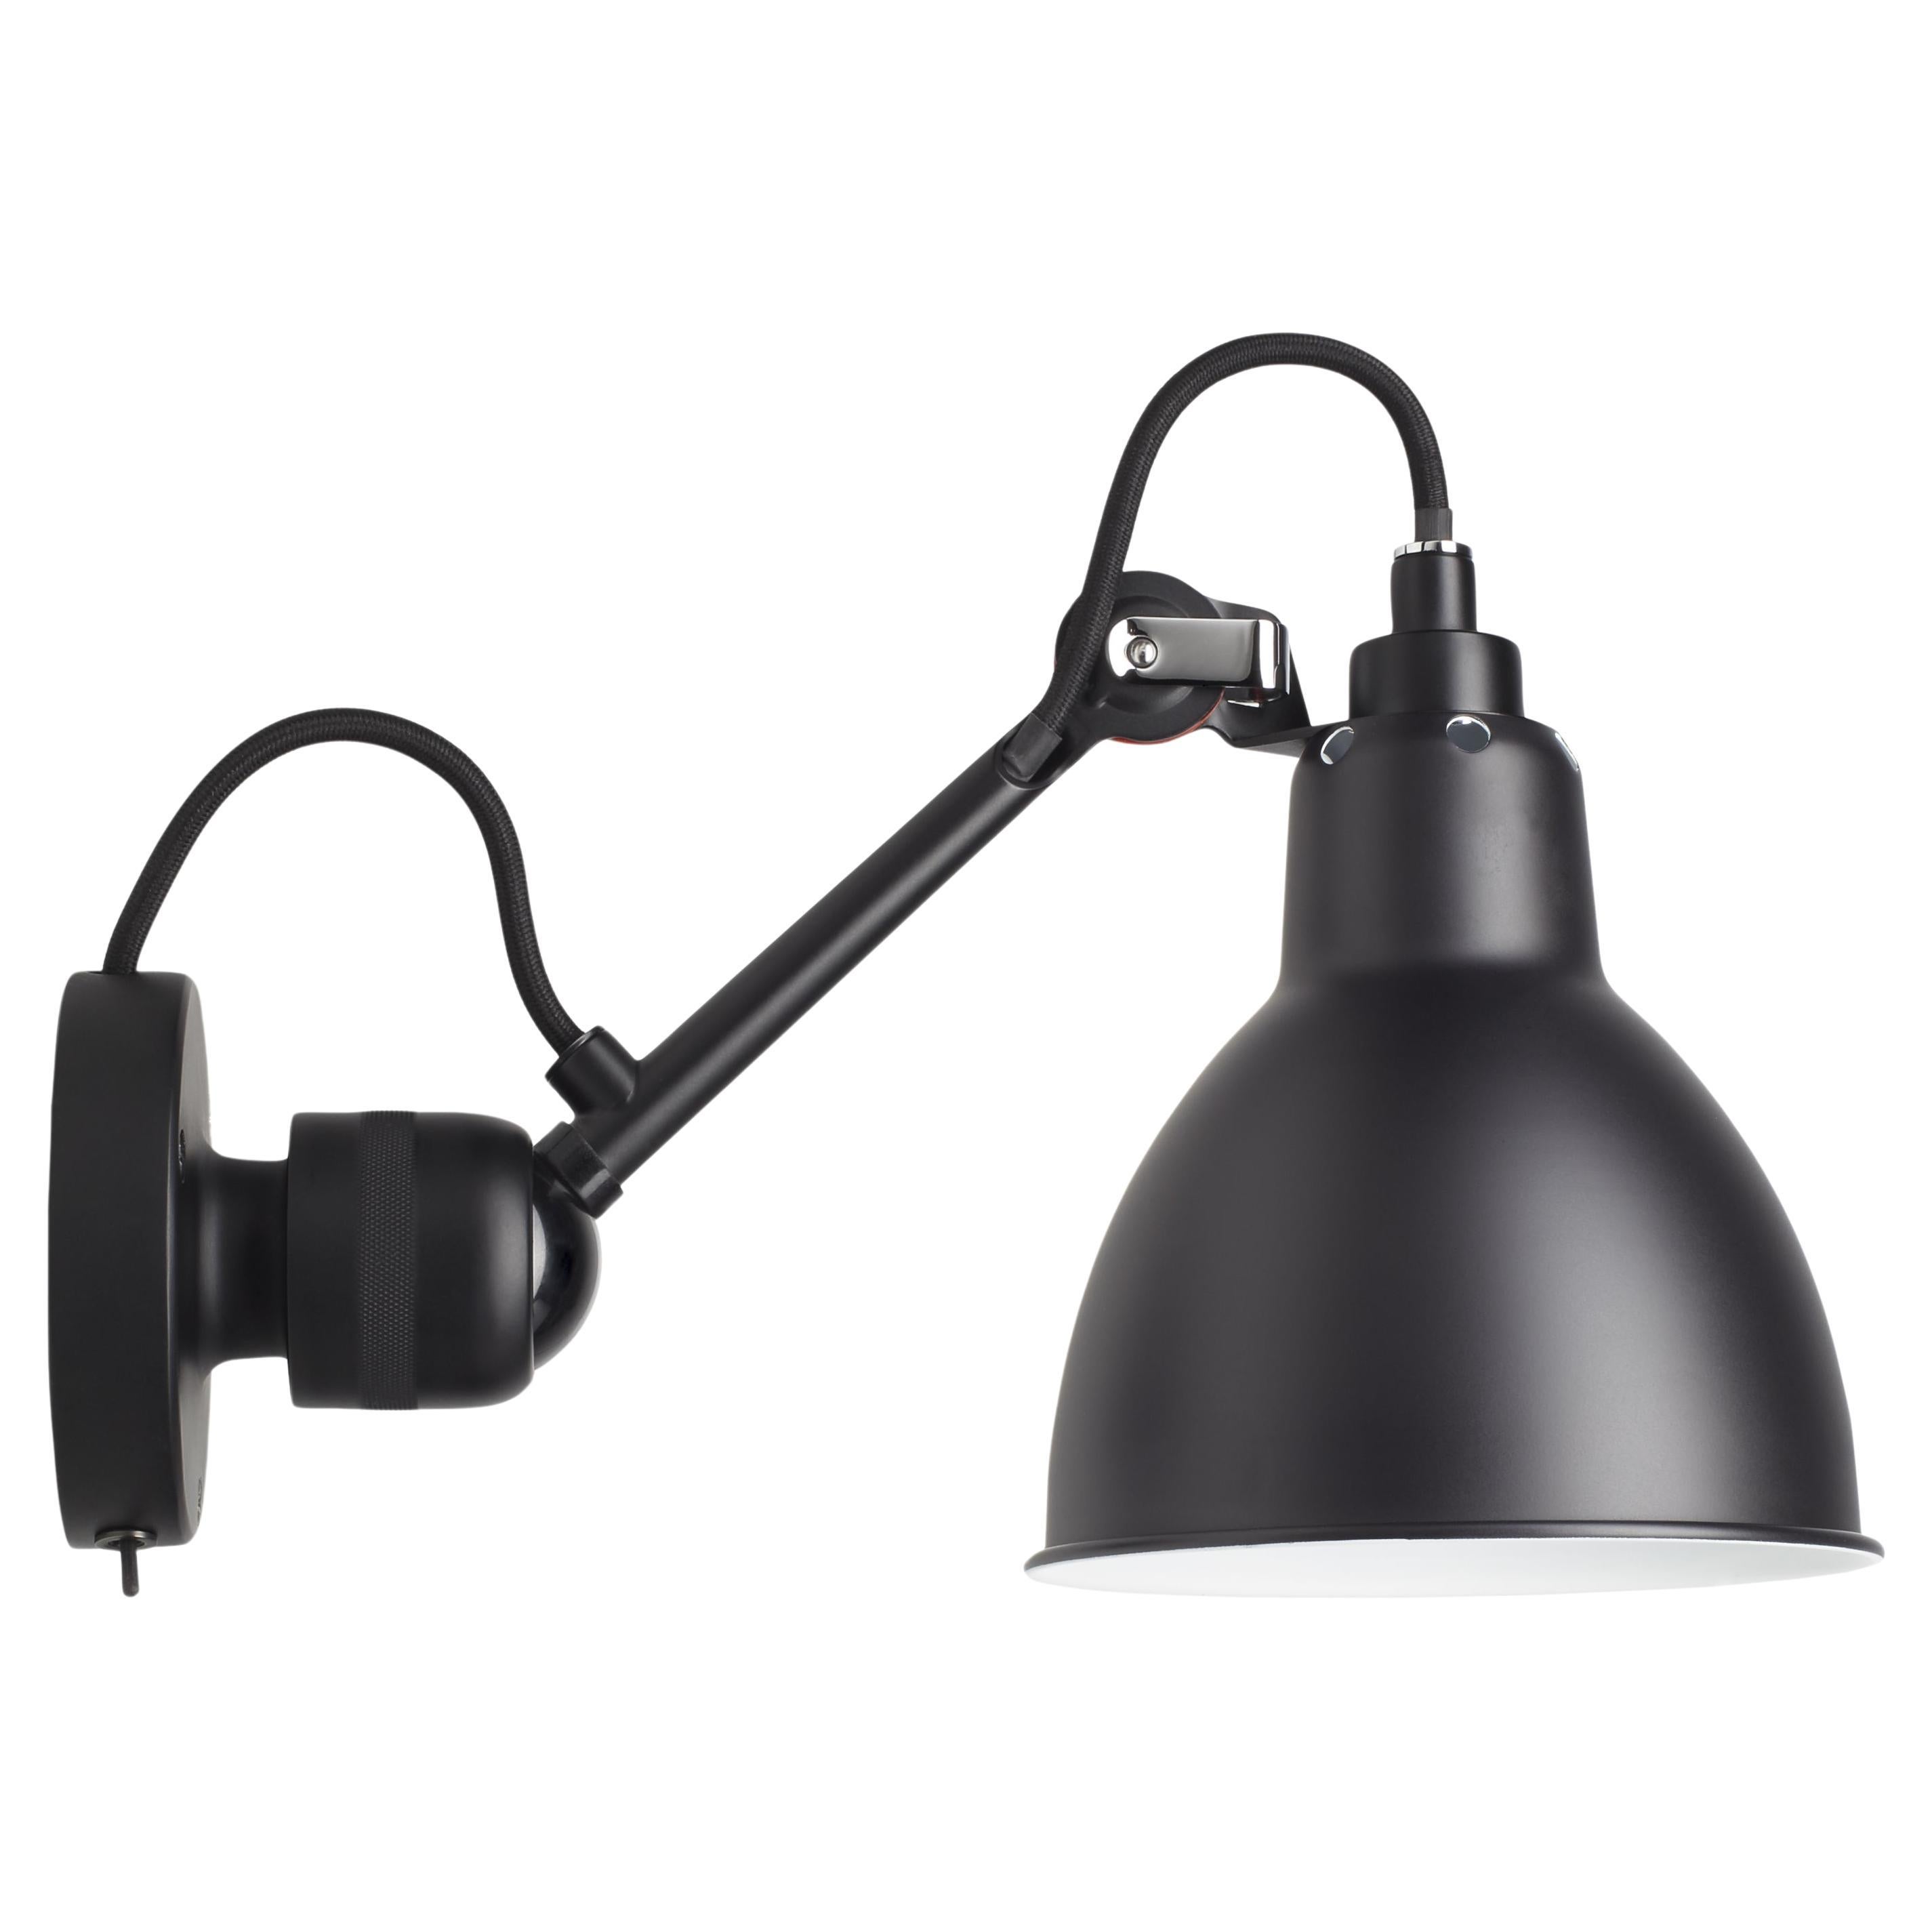 DCW Editions La Lampe Gras N°304 SW Wall Lamp in Black Arm and Black Shade